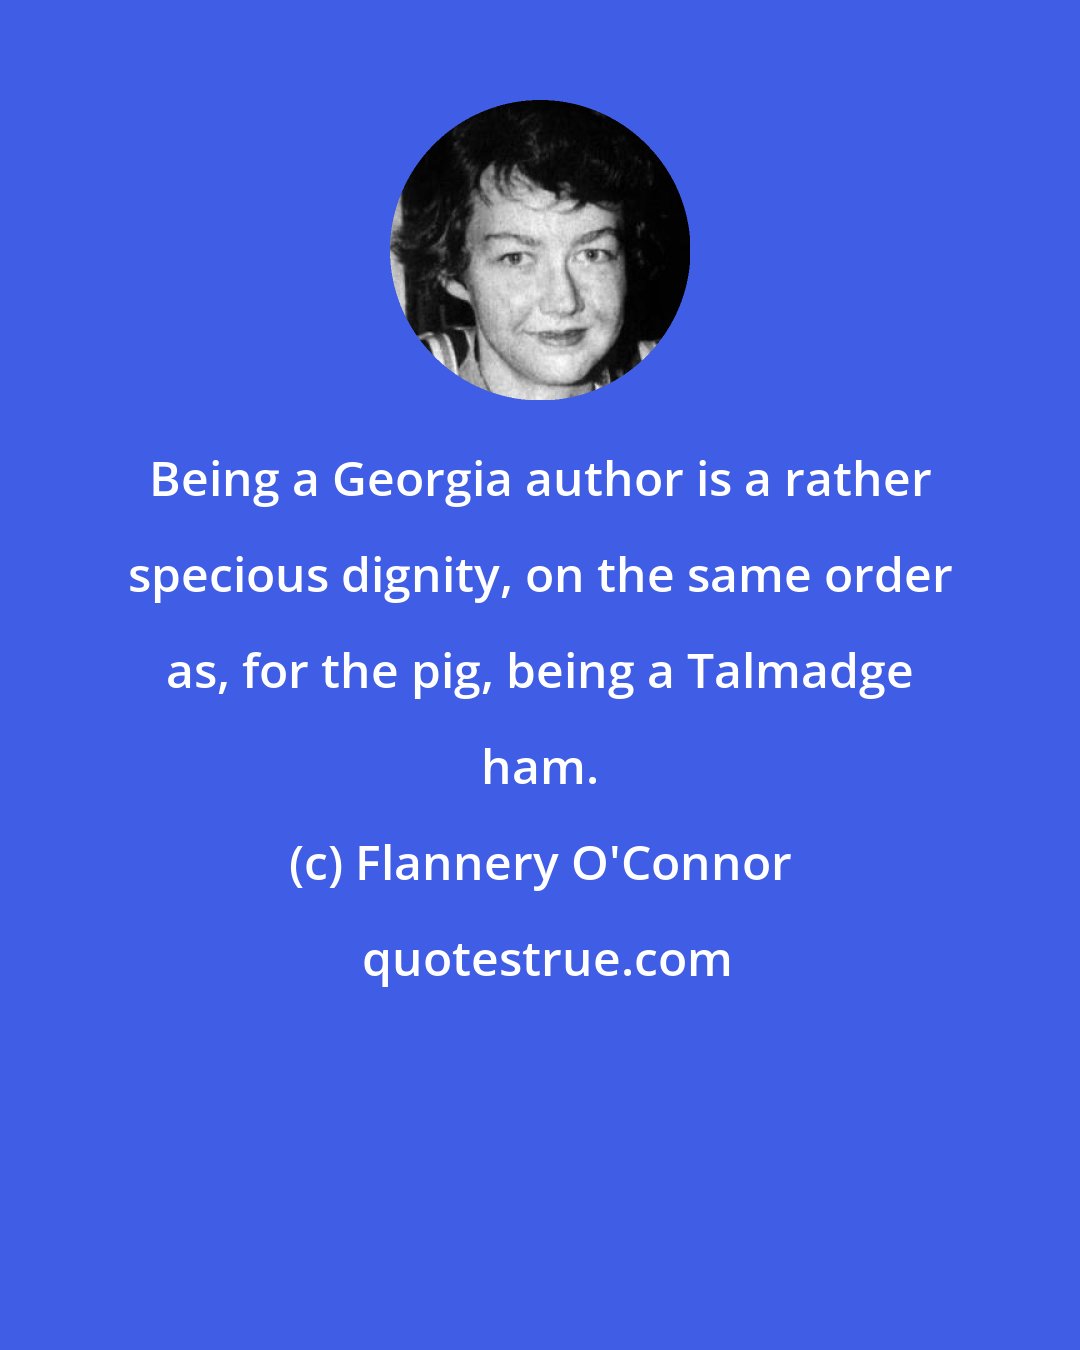 Flannery O'Connor: Being a Georgia author is a rather specious dignity, on the same order as, for the pig, being a Talmadge ham.